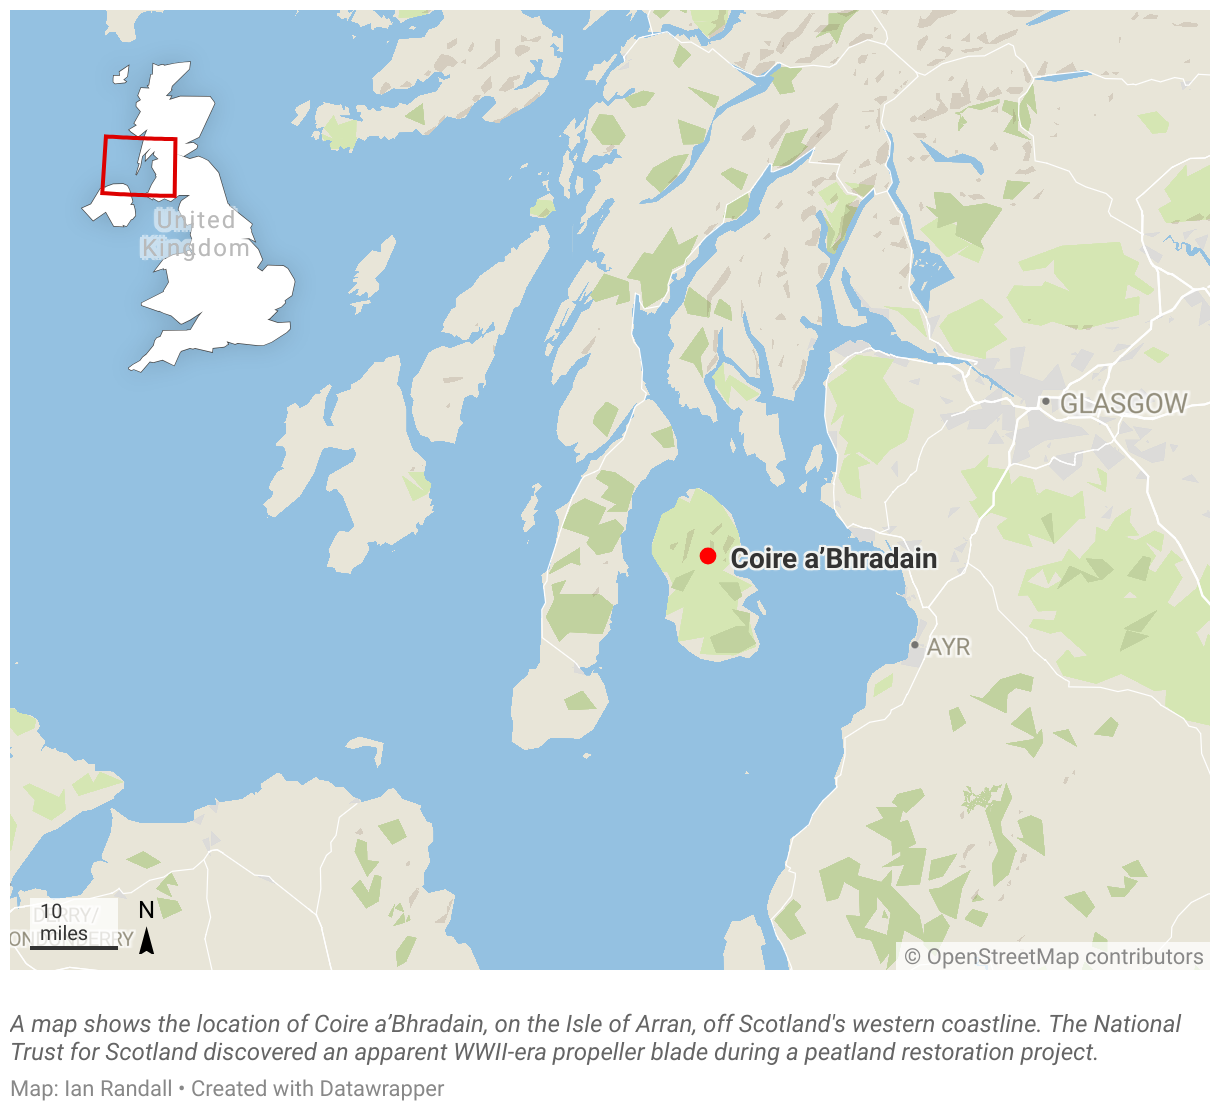 A map shows the location of Coire a’Bhradain, on the Isle of Arran, off Scotland's western coastline.